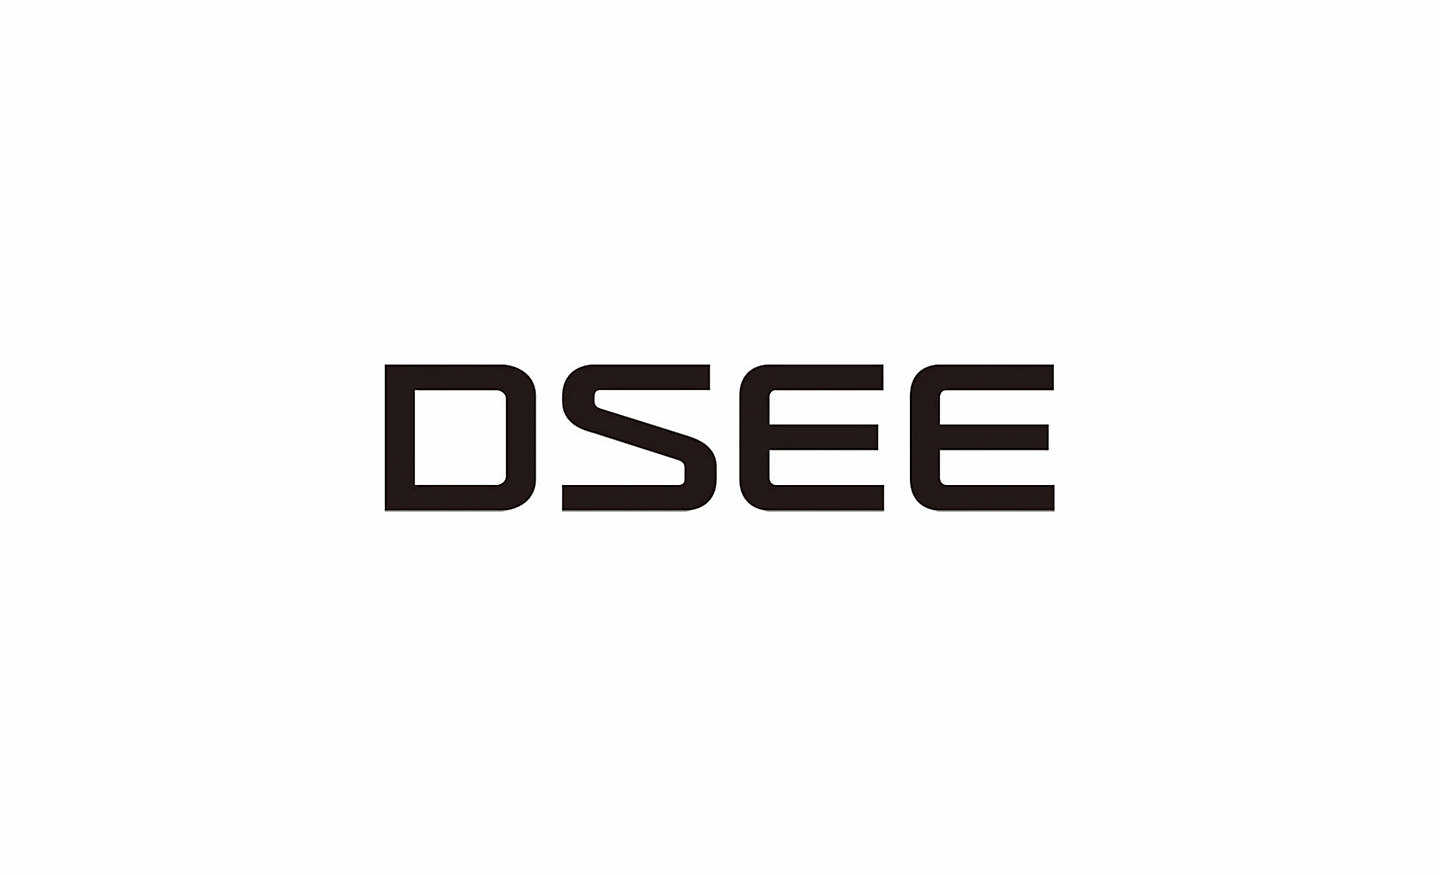 Image of a DSEE logo